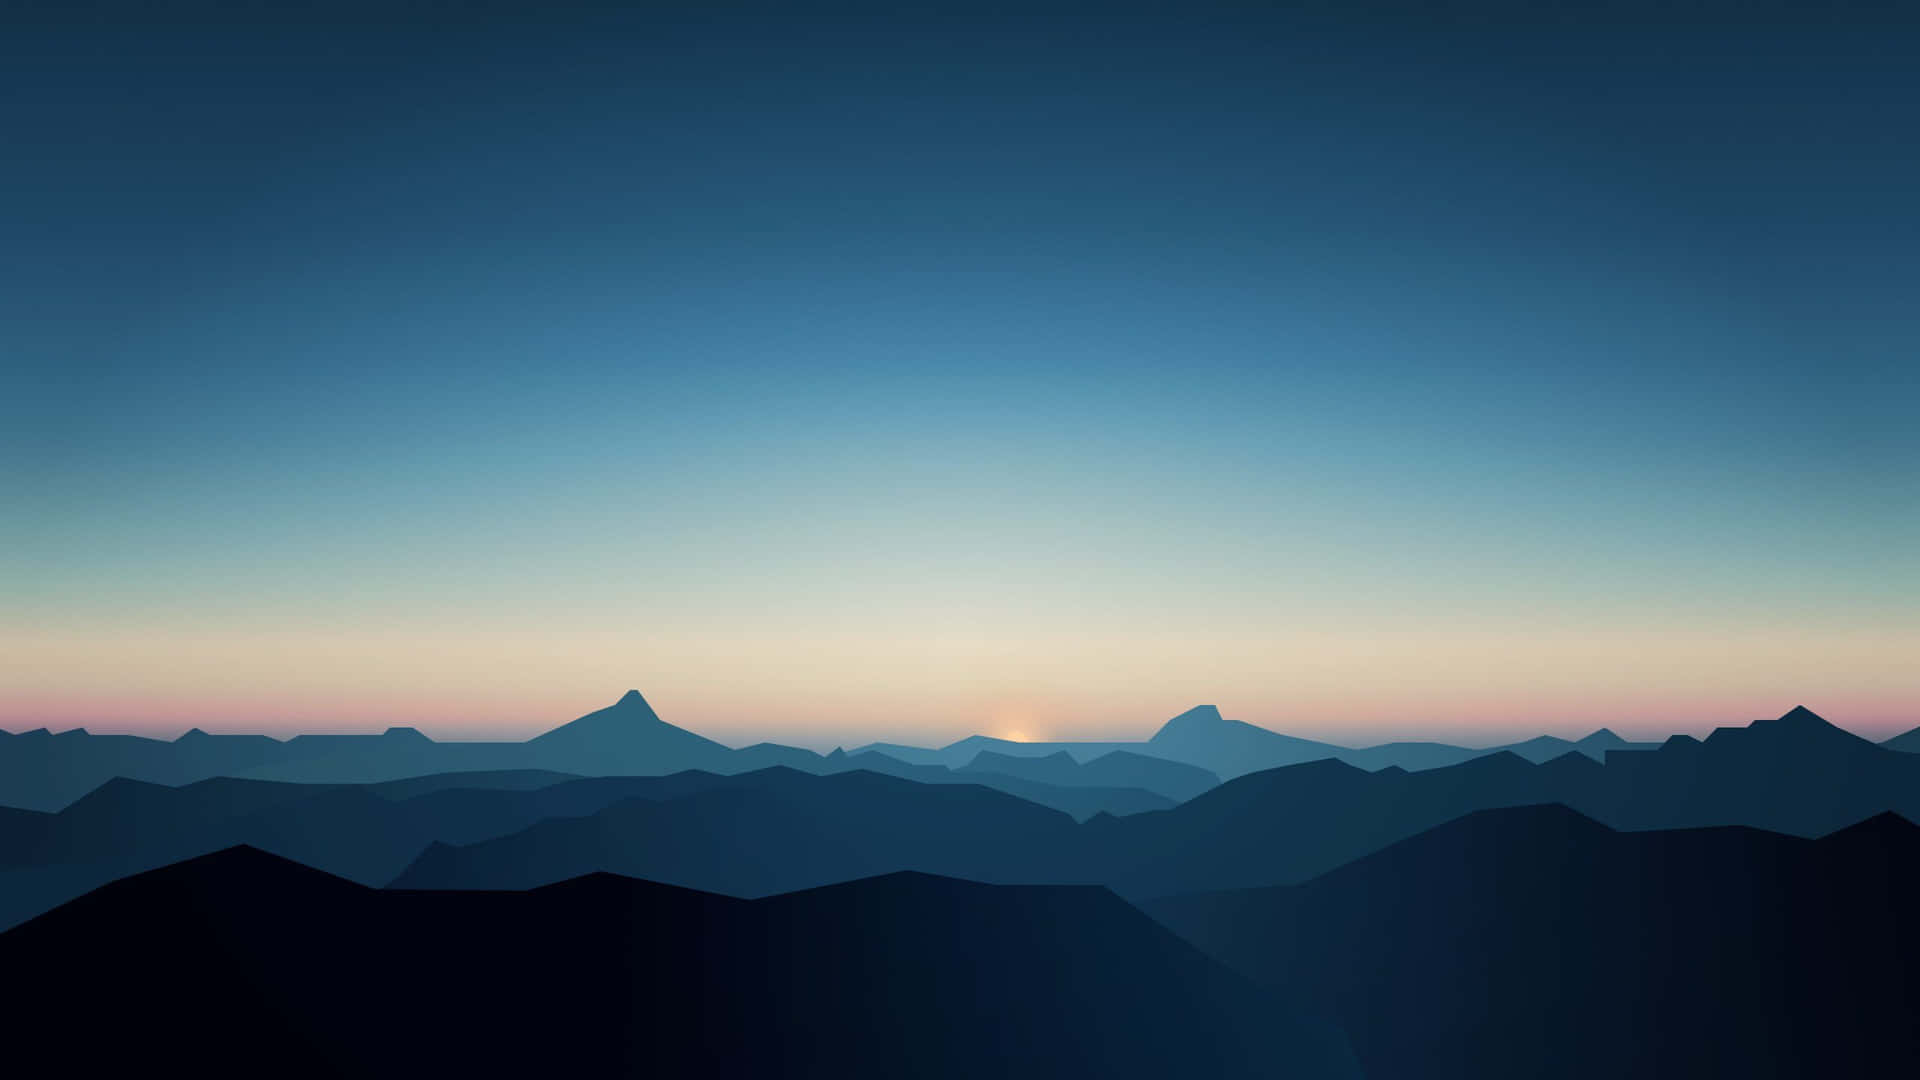 A Mountain Range At Sunset With Mountains In The Background Wallpaper